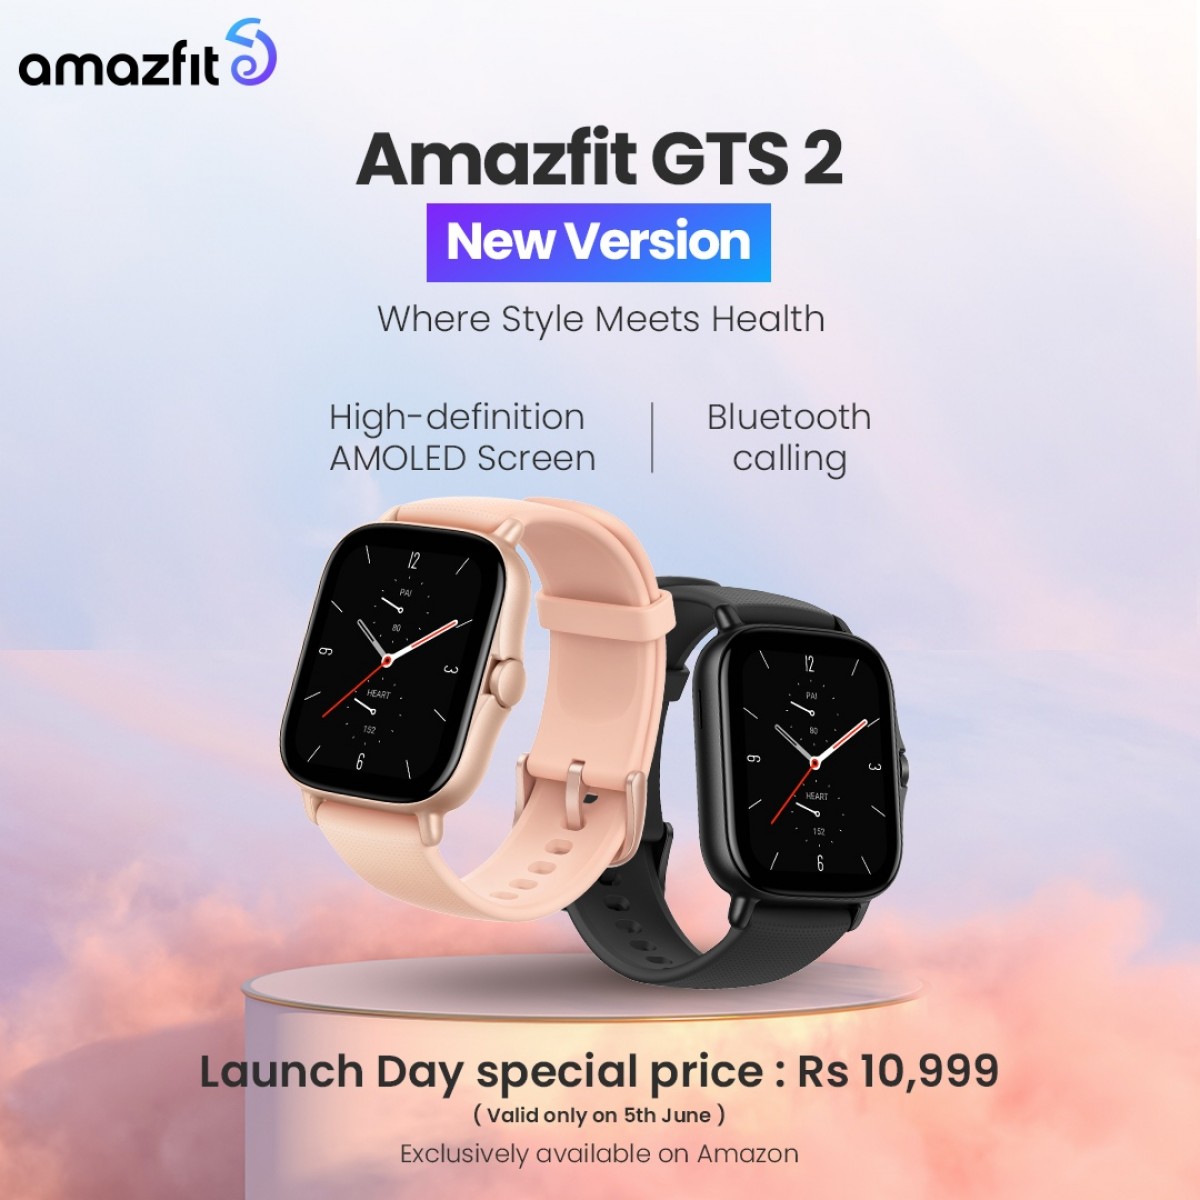 New version of Amazfit GTS 2 launches in India with a lower price